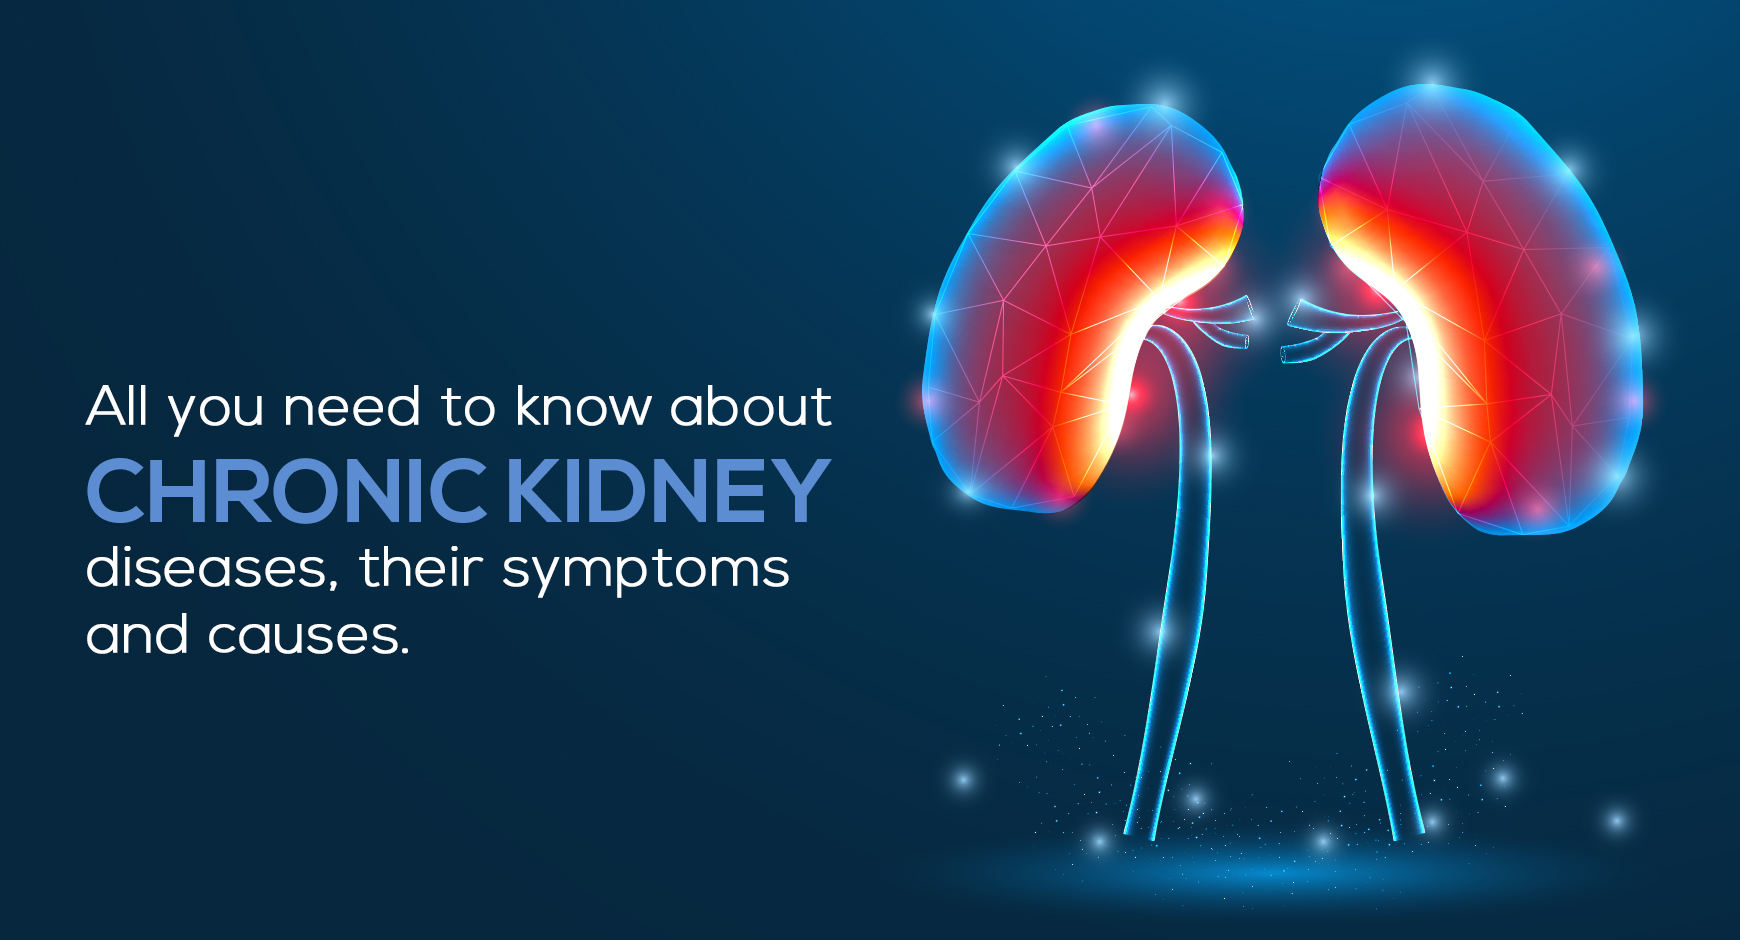 All you need to know about chronic kidney diseases, their symptoms, and causes